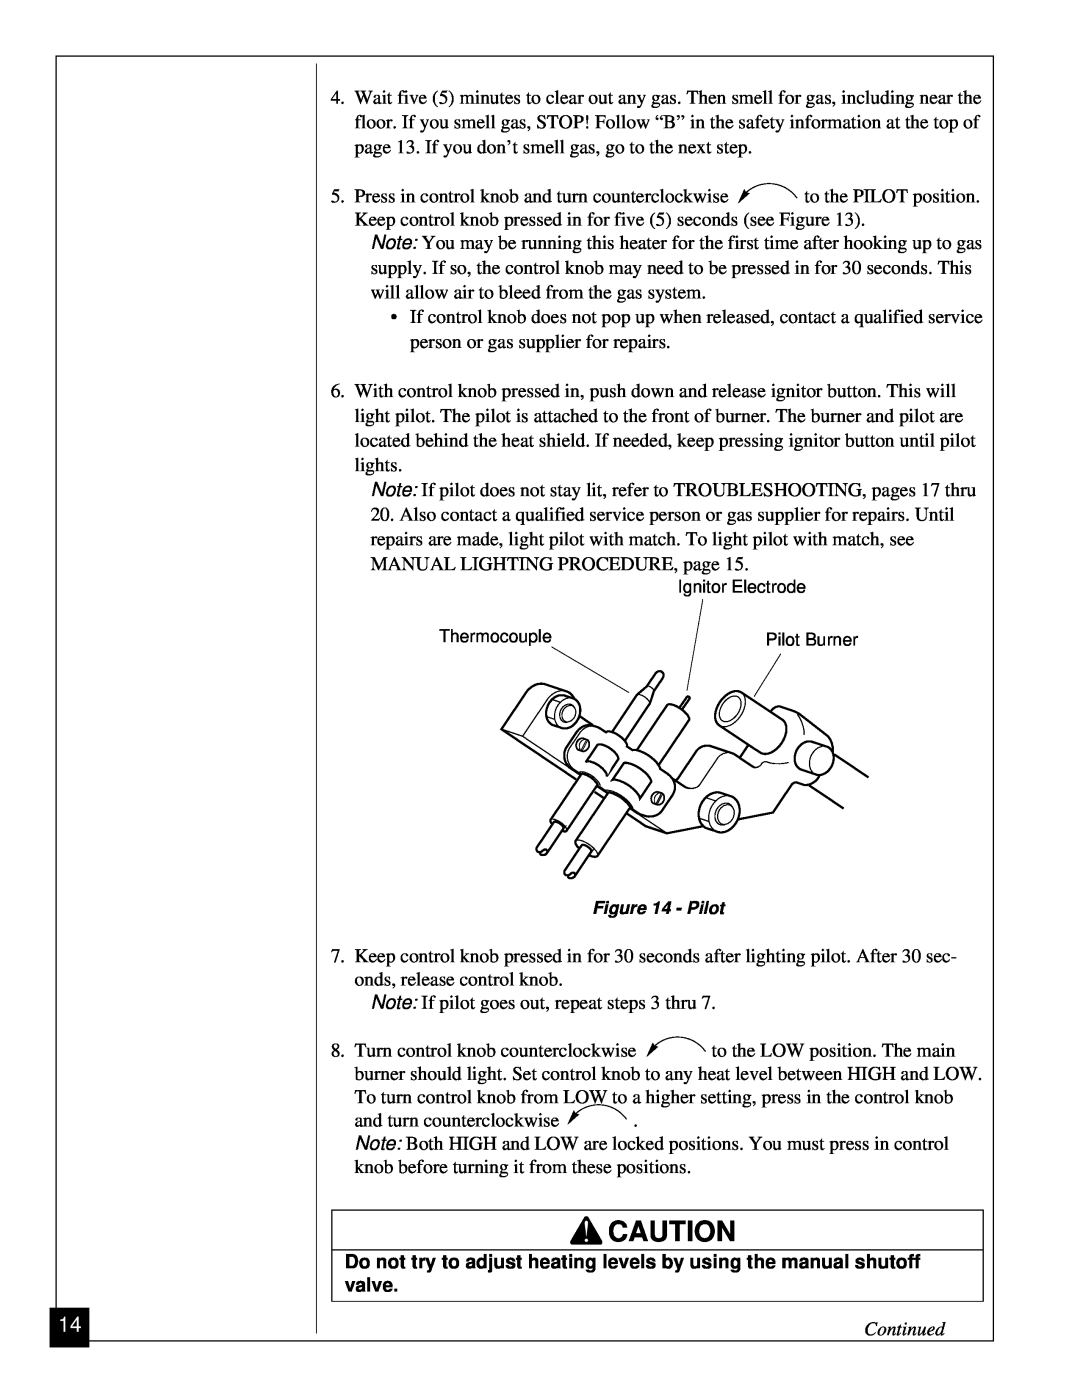 Vanguard Heating VGN30 installation manual Note If pilot goes out, repeat steps 3 thru, Continued 